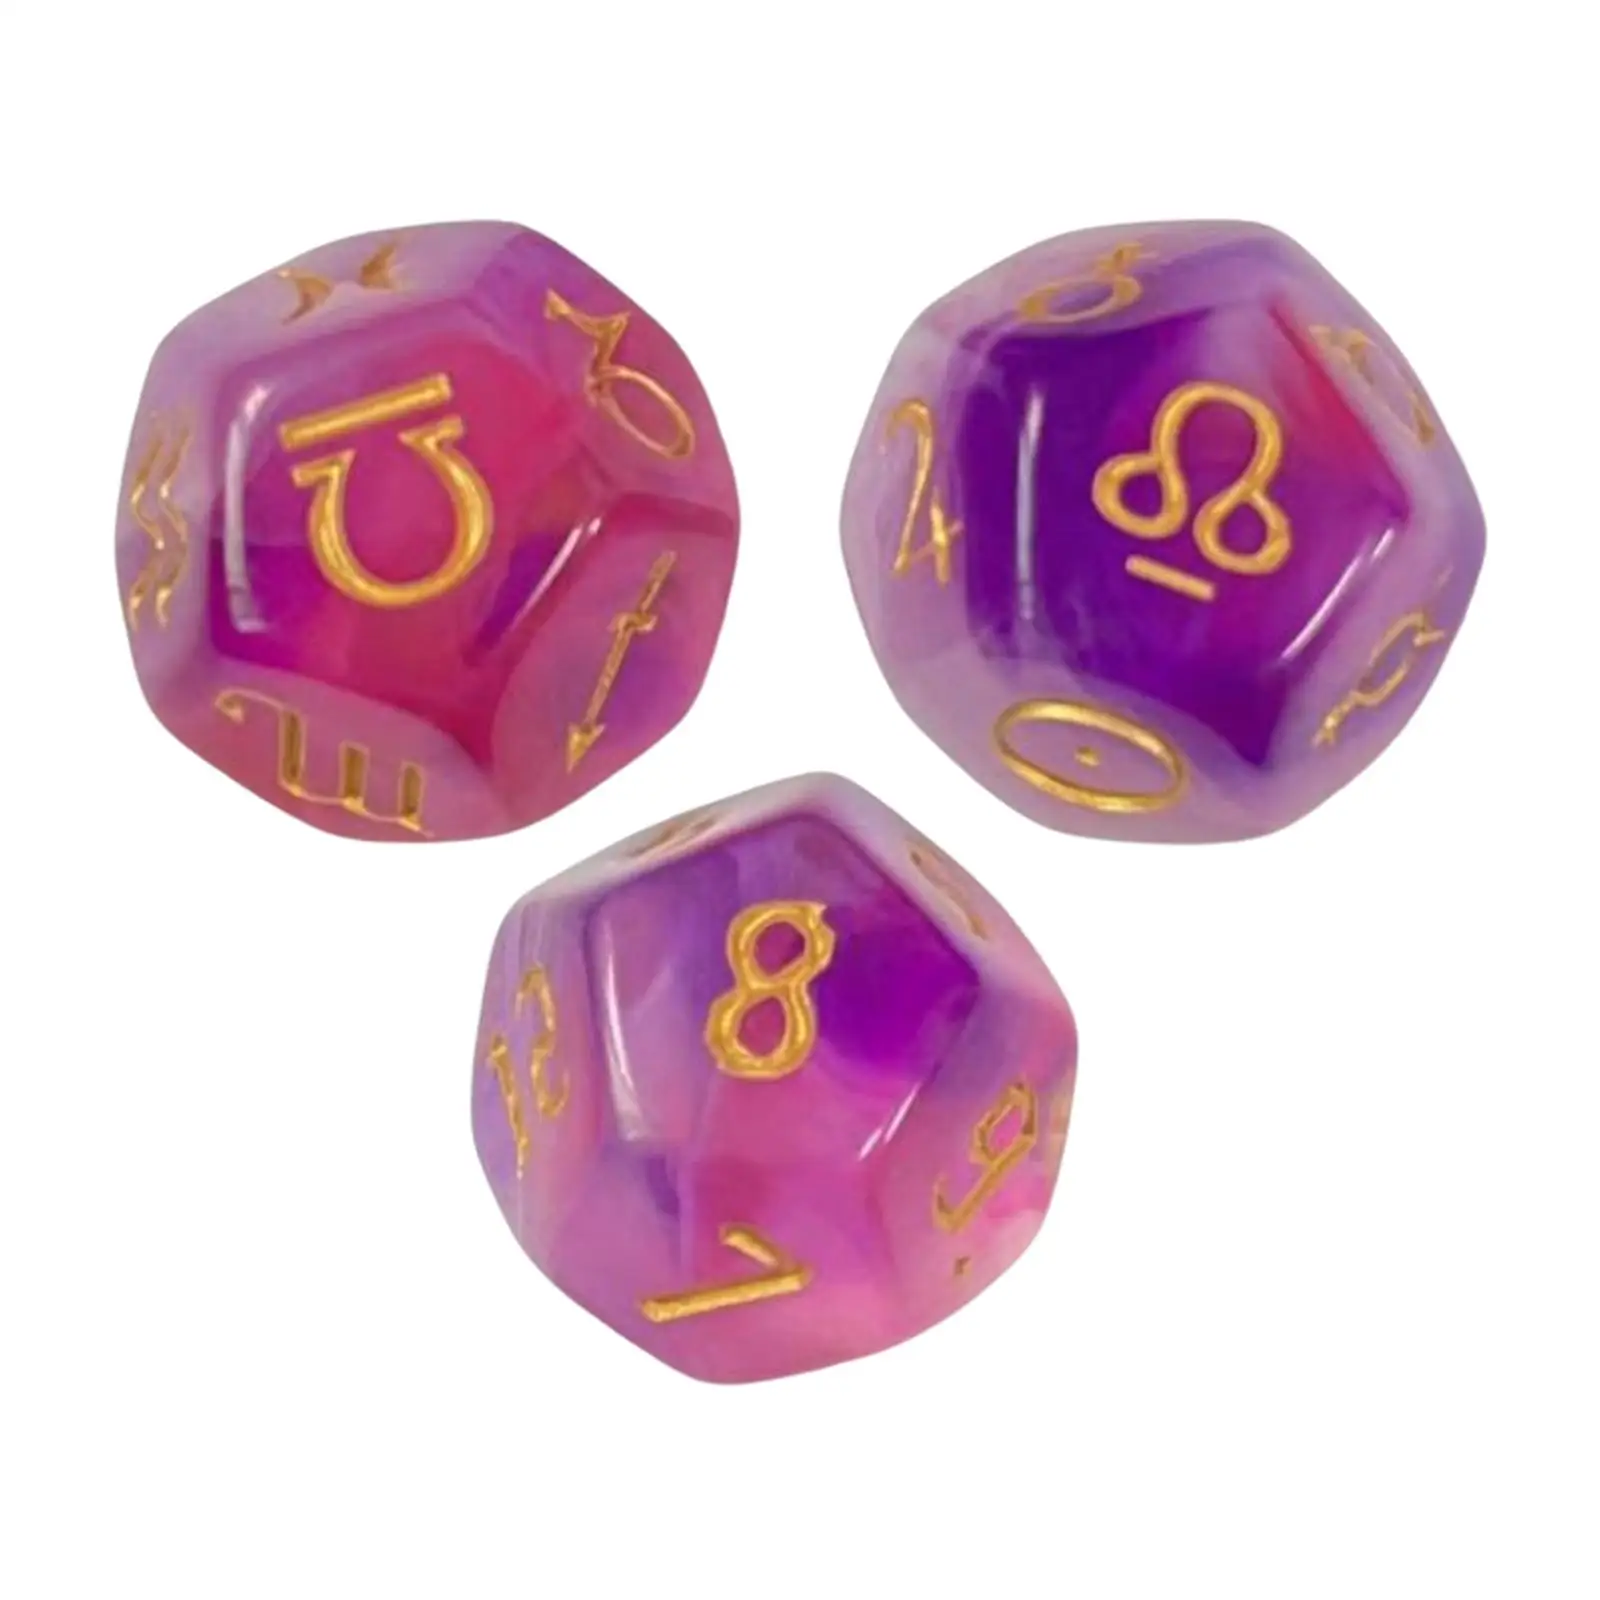 3Pcs D12 Acrylic Astrology Divination Dice Constellation Divination Dice for Role Playing Table Games Tarot Card Fortune Telling